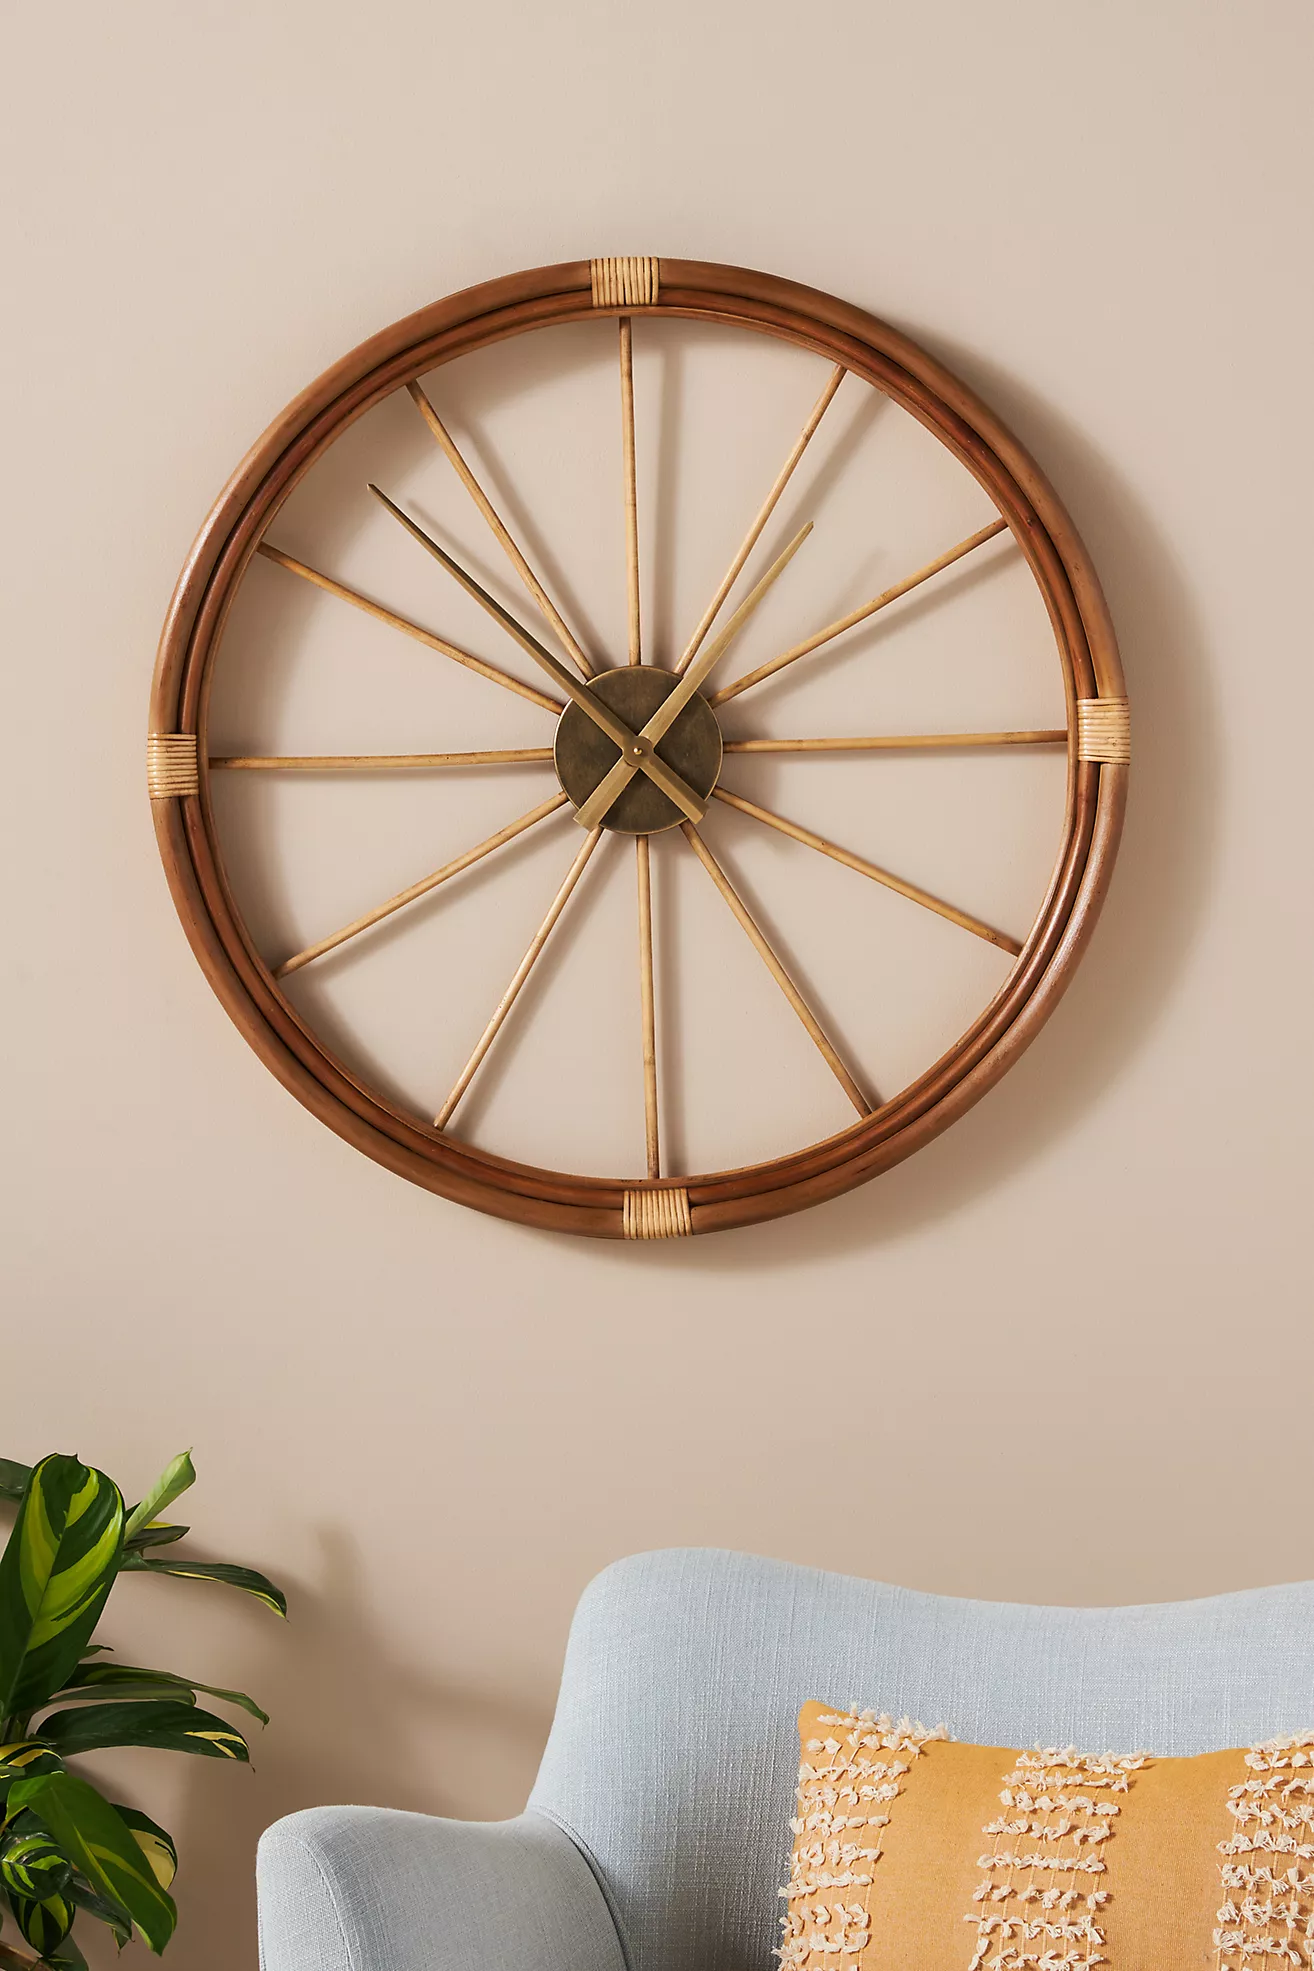 Bring in a Large Rustic Wall Clock